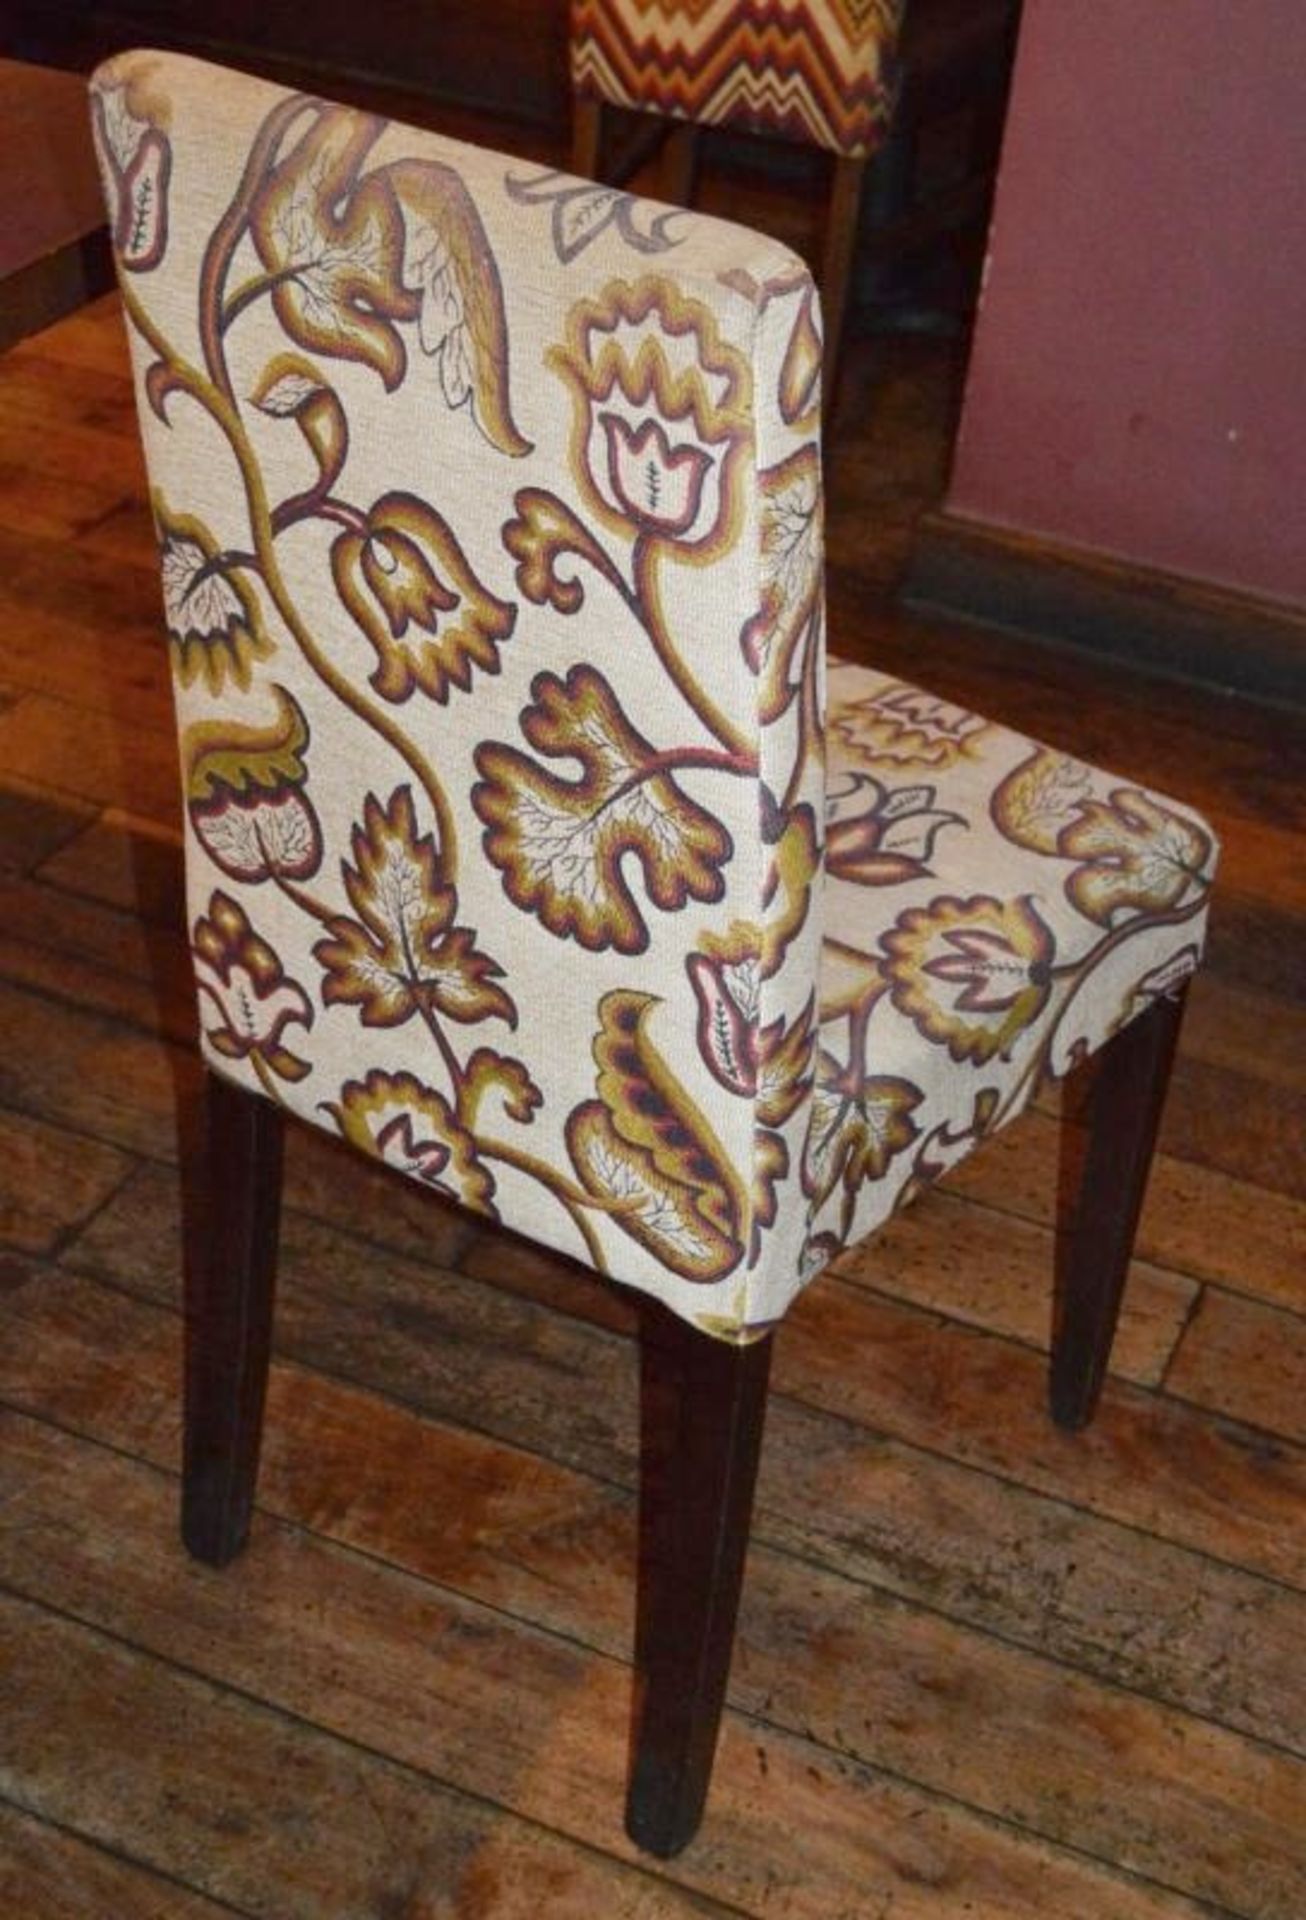 3 x Upholstered Restaurant Dining Chairs In A Floral Mexican-style Fabric - Image 2 of 3